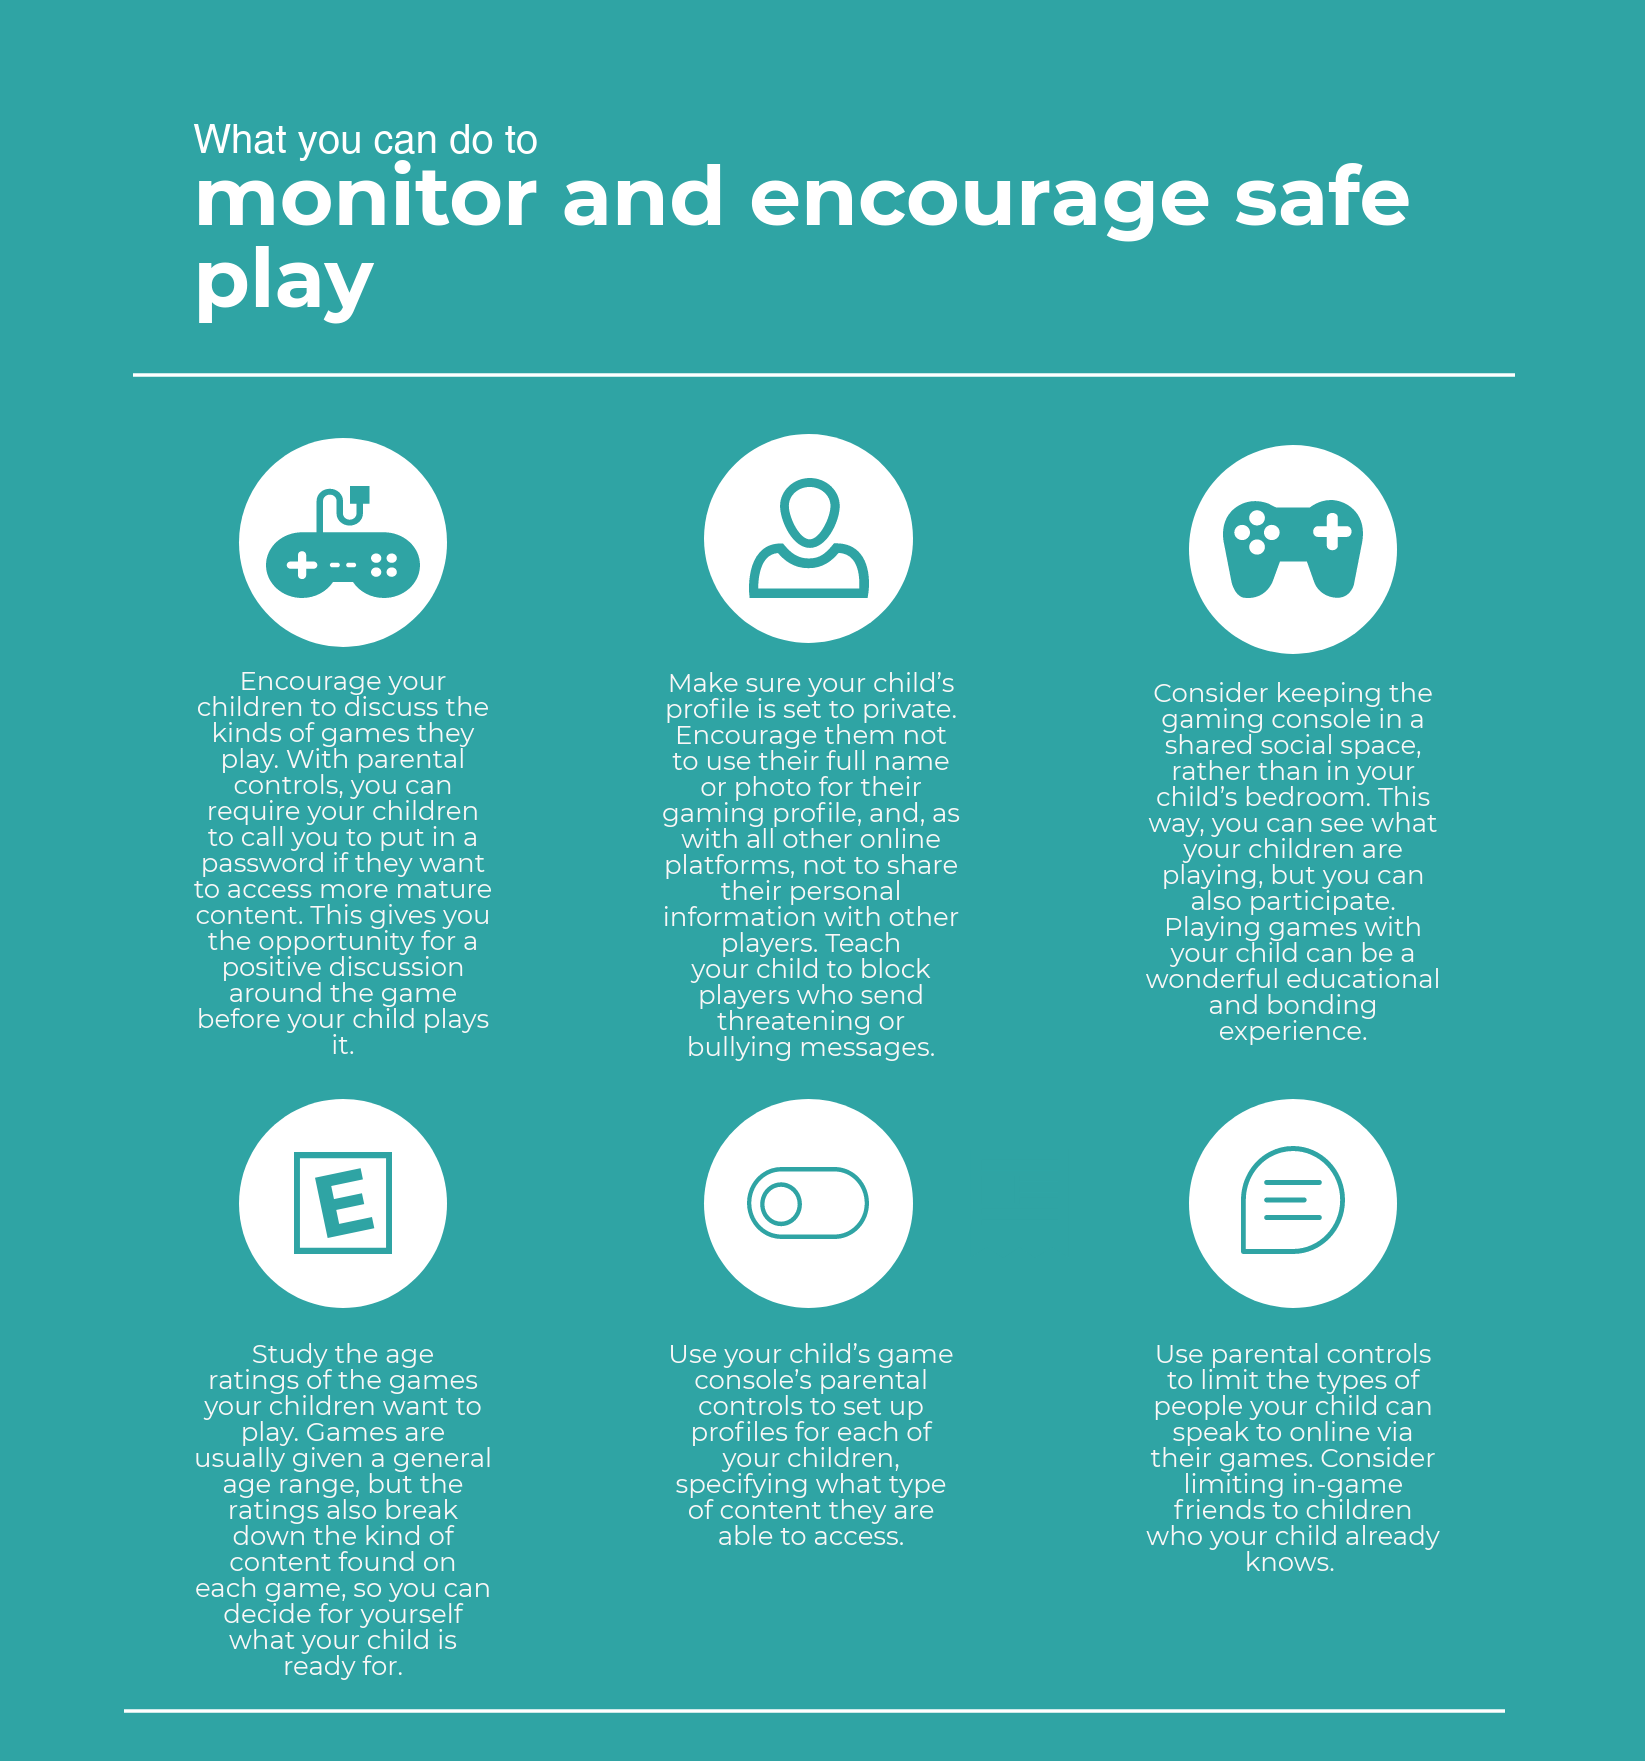 Monitor and encourage safe play infographic